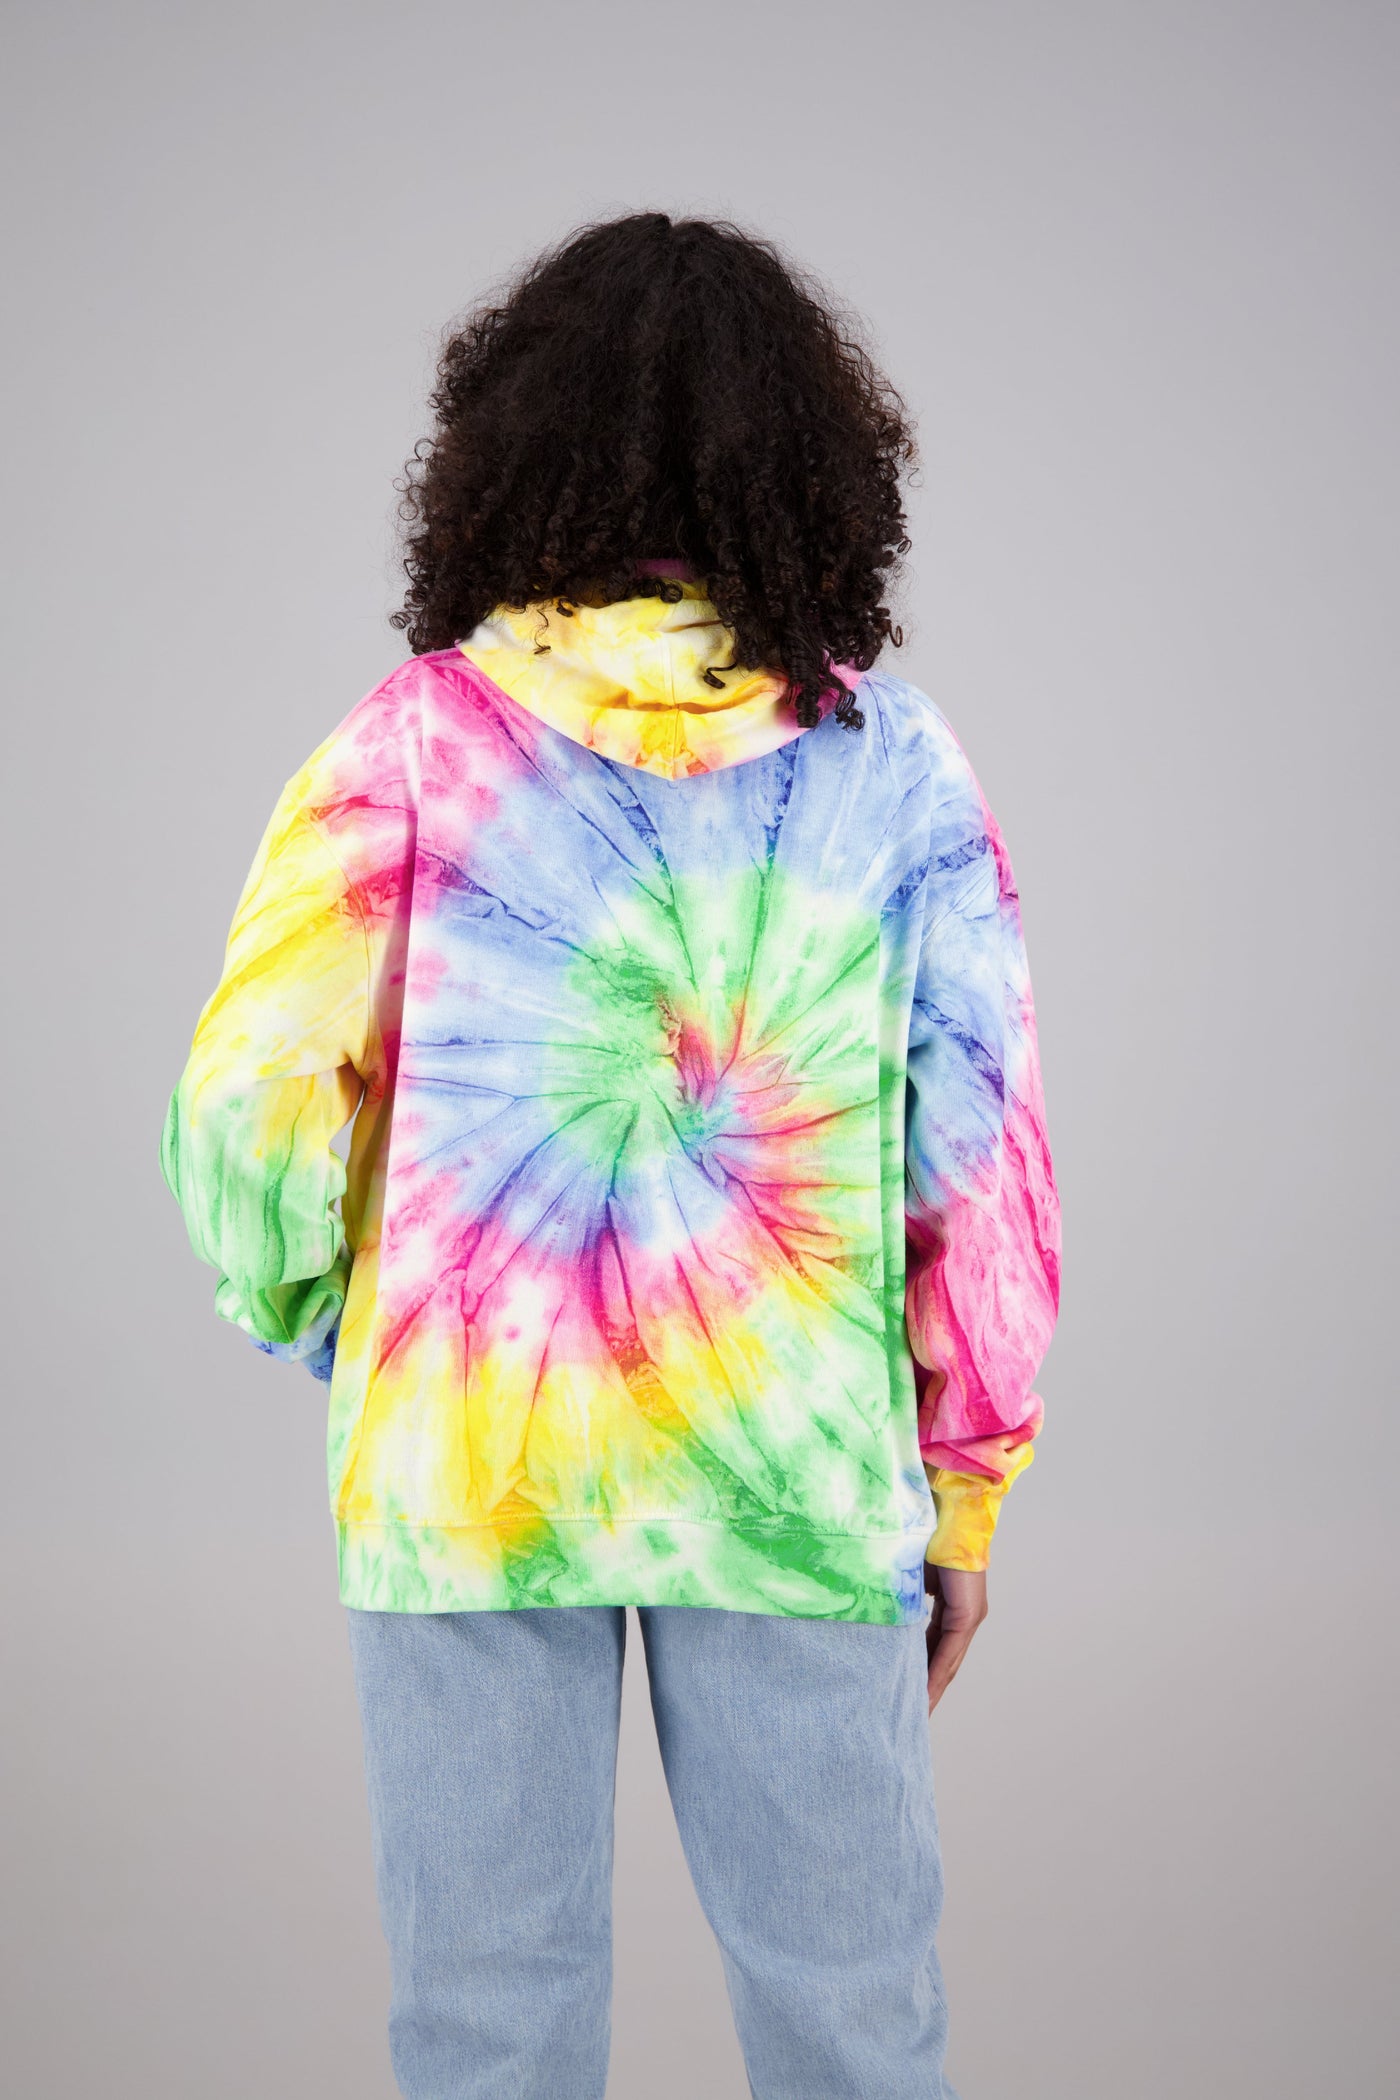 Adult's Tie-Dye Zip-Up Hoodie (2-XL) Cotton/Polyester Blend 9660